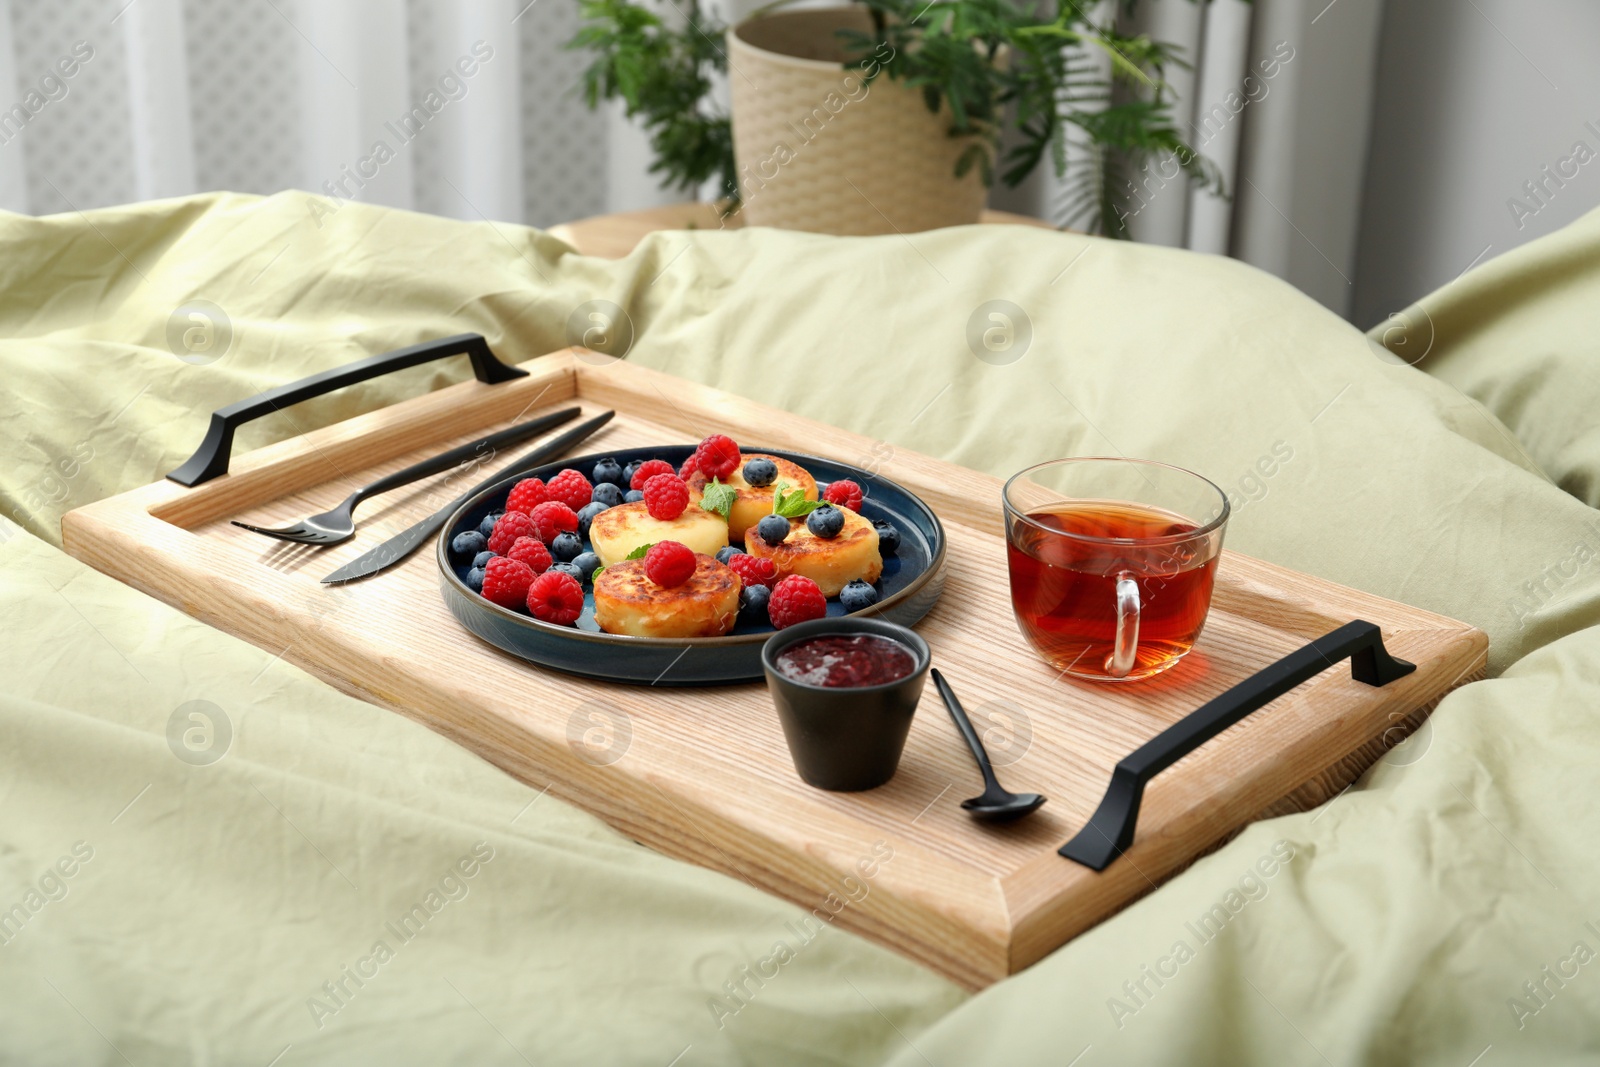 Photo of Tasty breakfast served in bedroom. Cottage cheese pancakes with fresh berries and mint on wooden tray